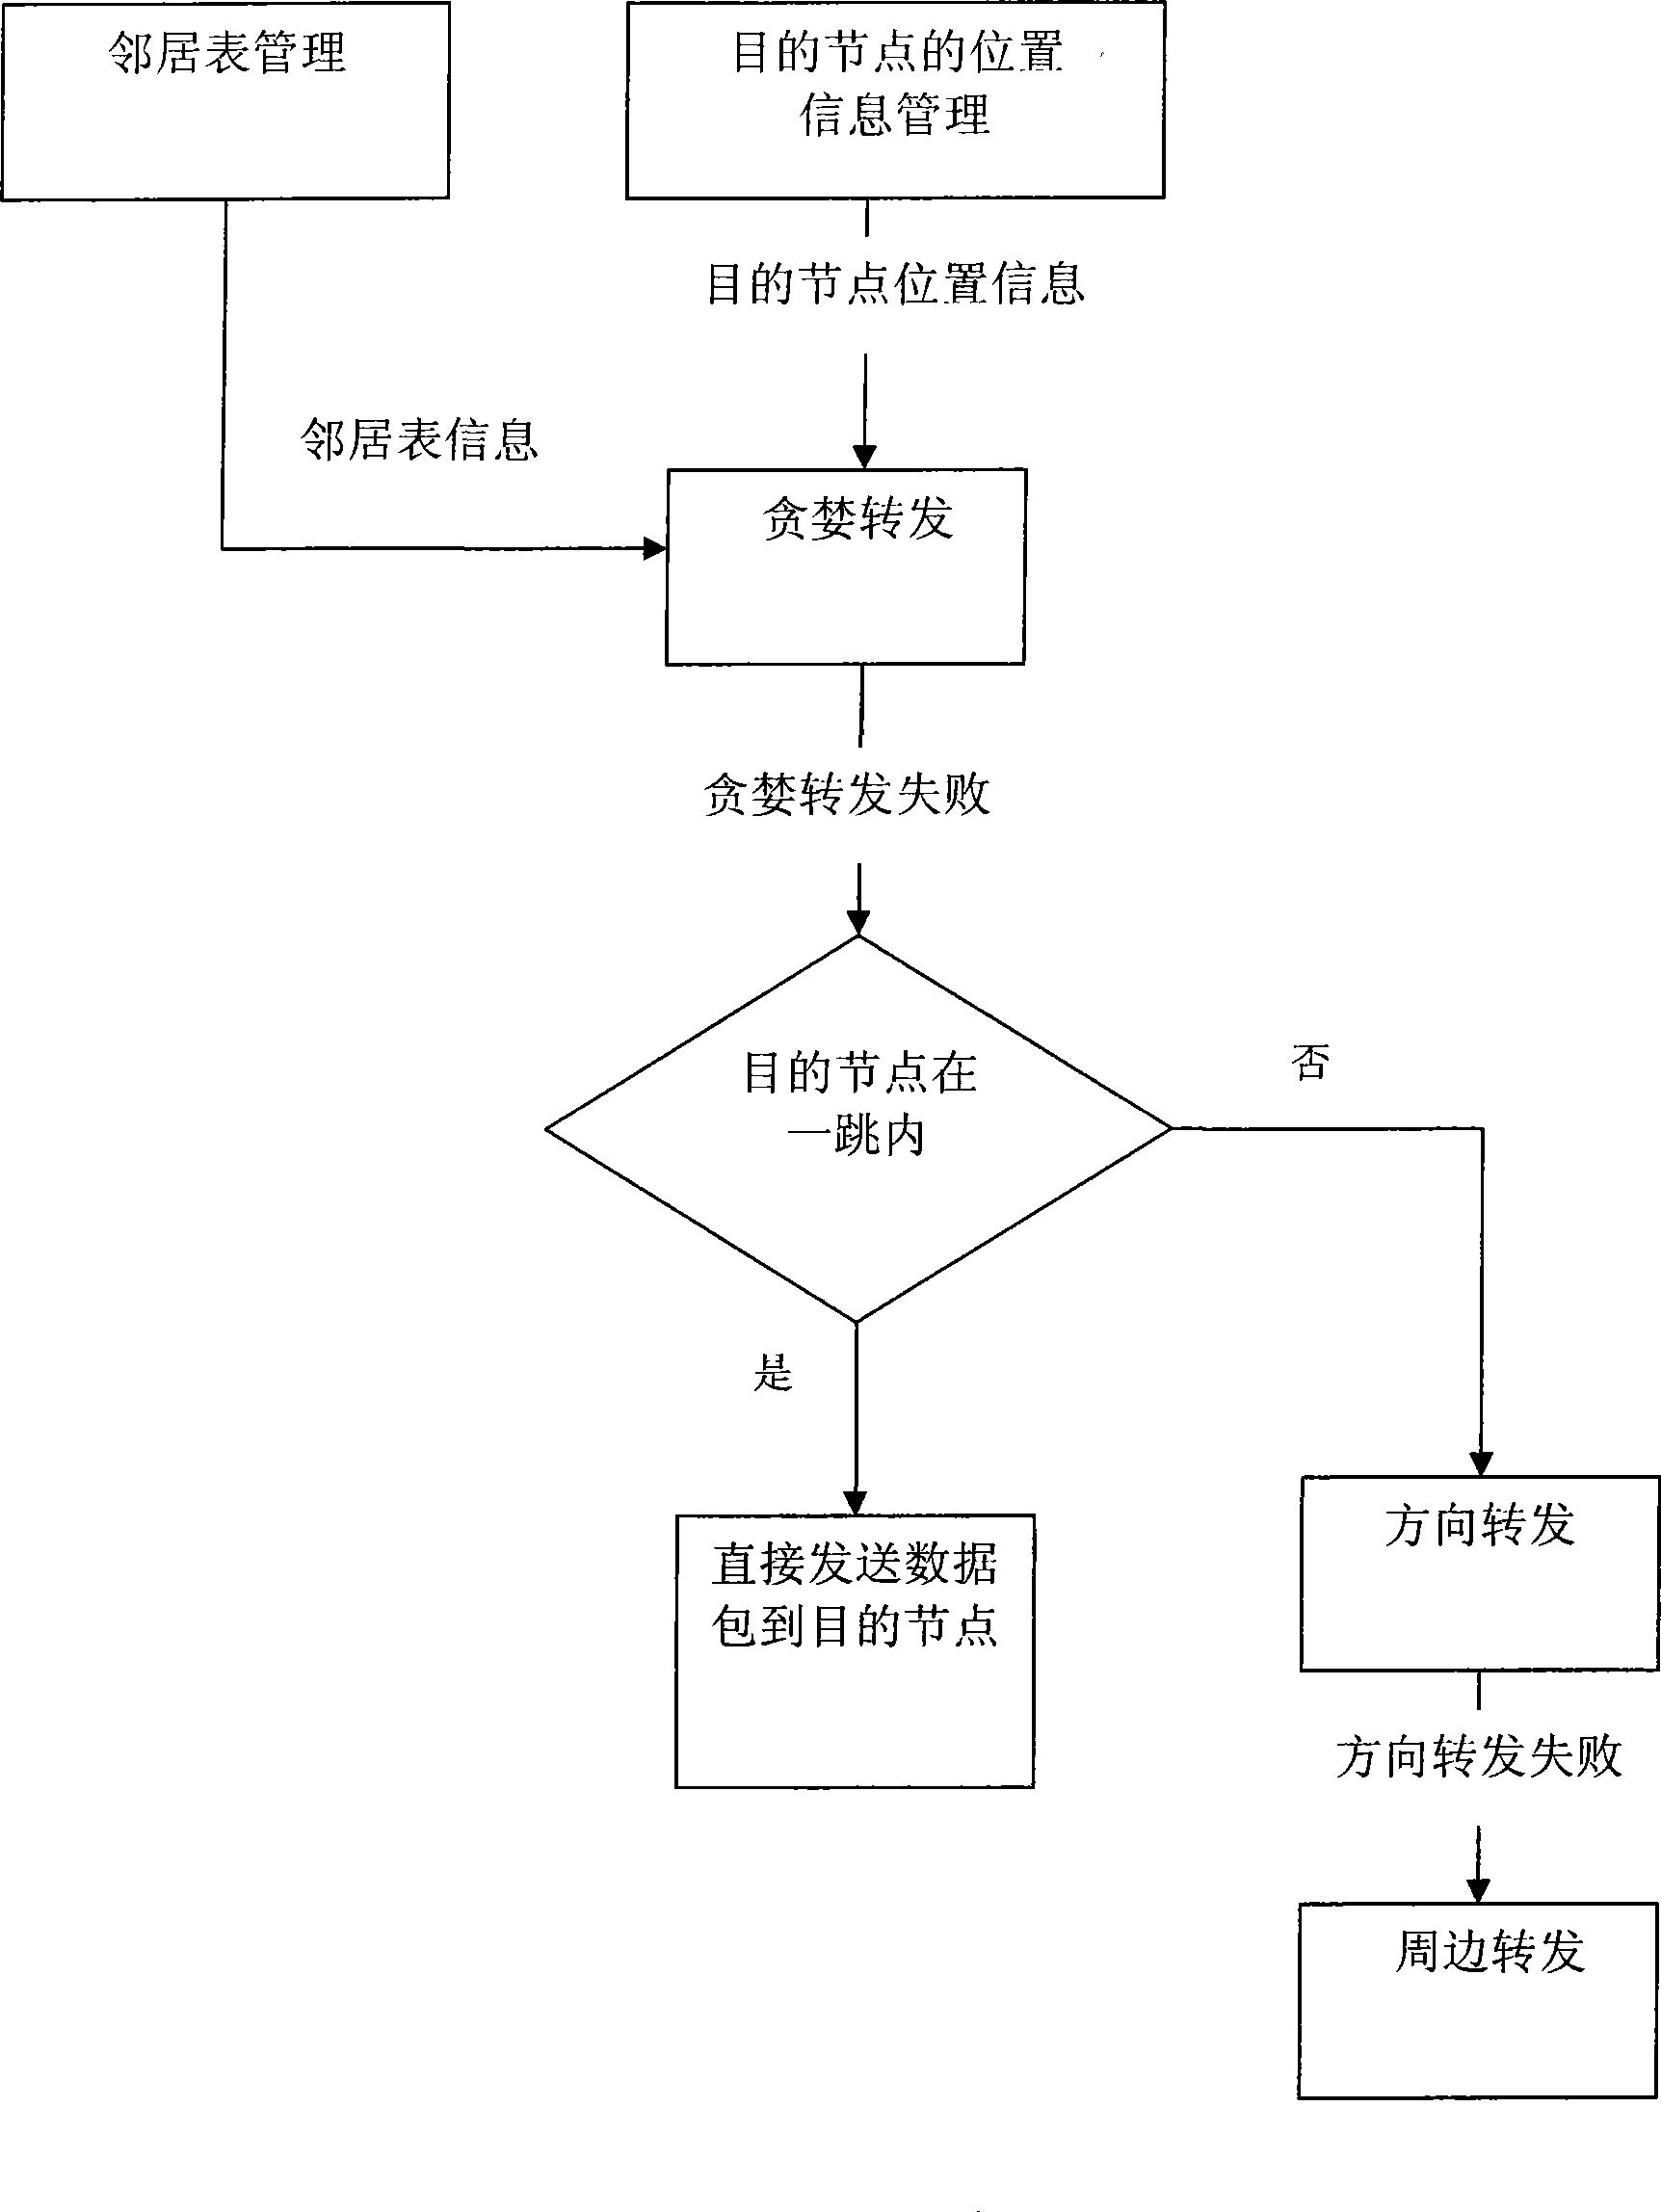 Greed data forwarding method based on direction in vehicle-mounted network